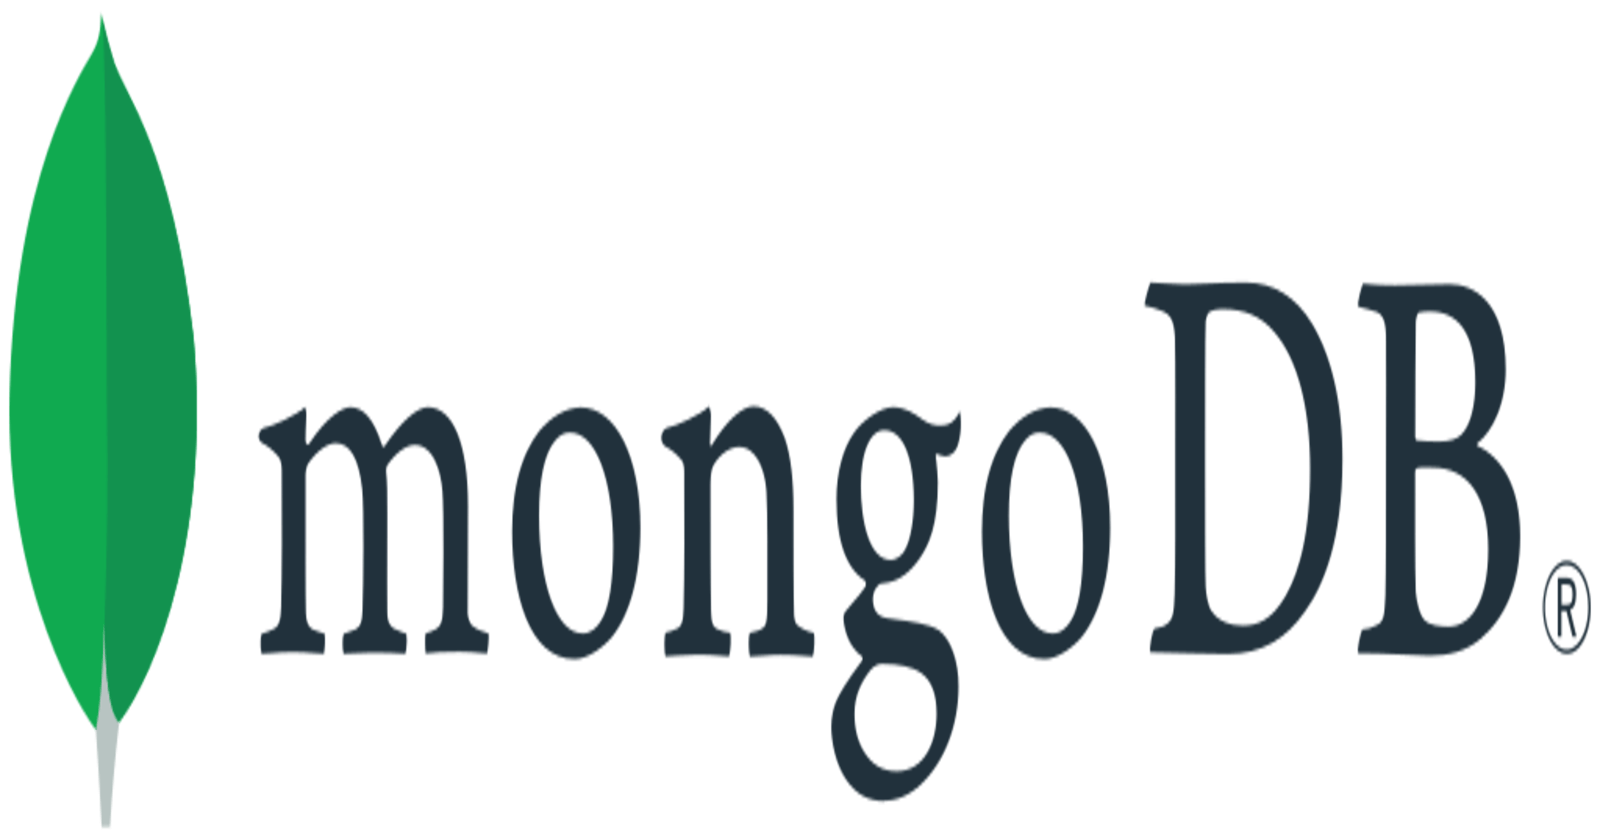 How To Get The Total Number Of Returned Rows From A Query In MongoDB: Simplest Explanation